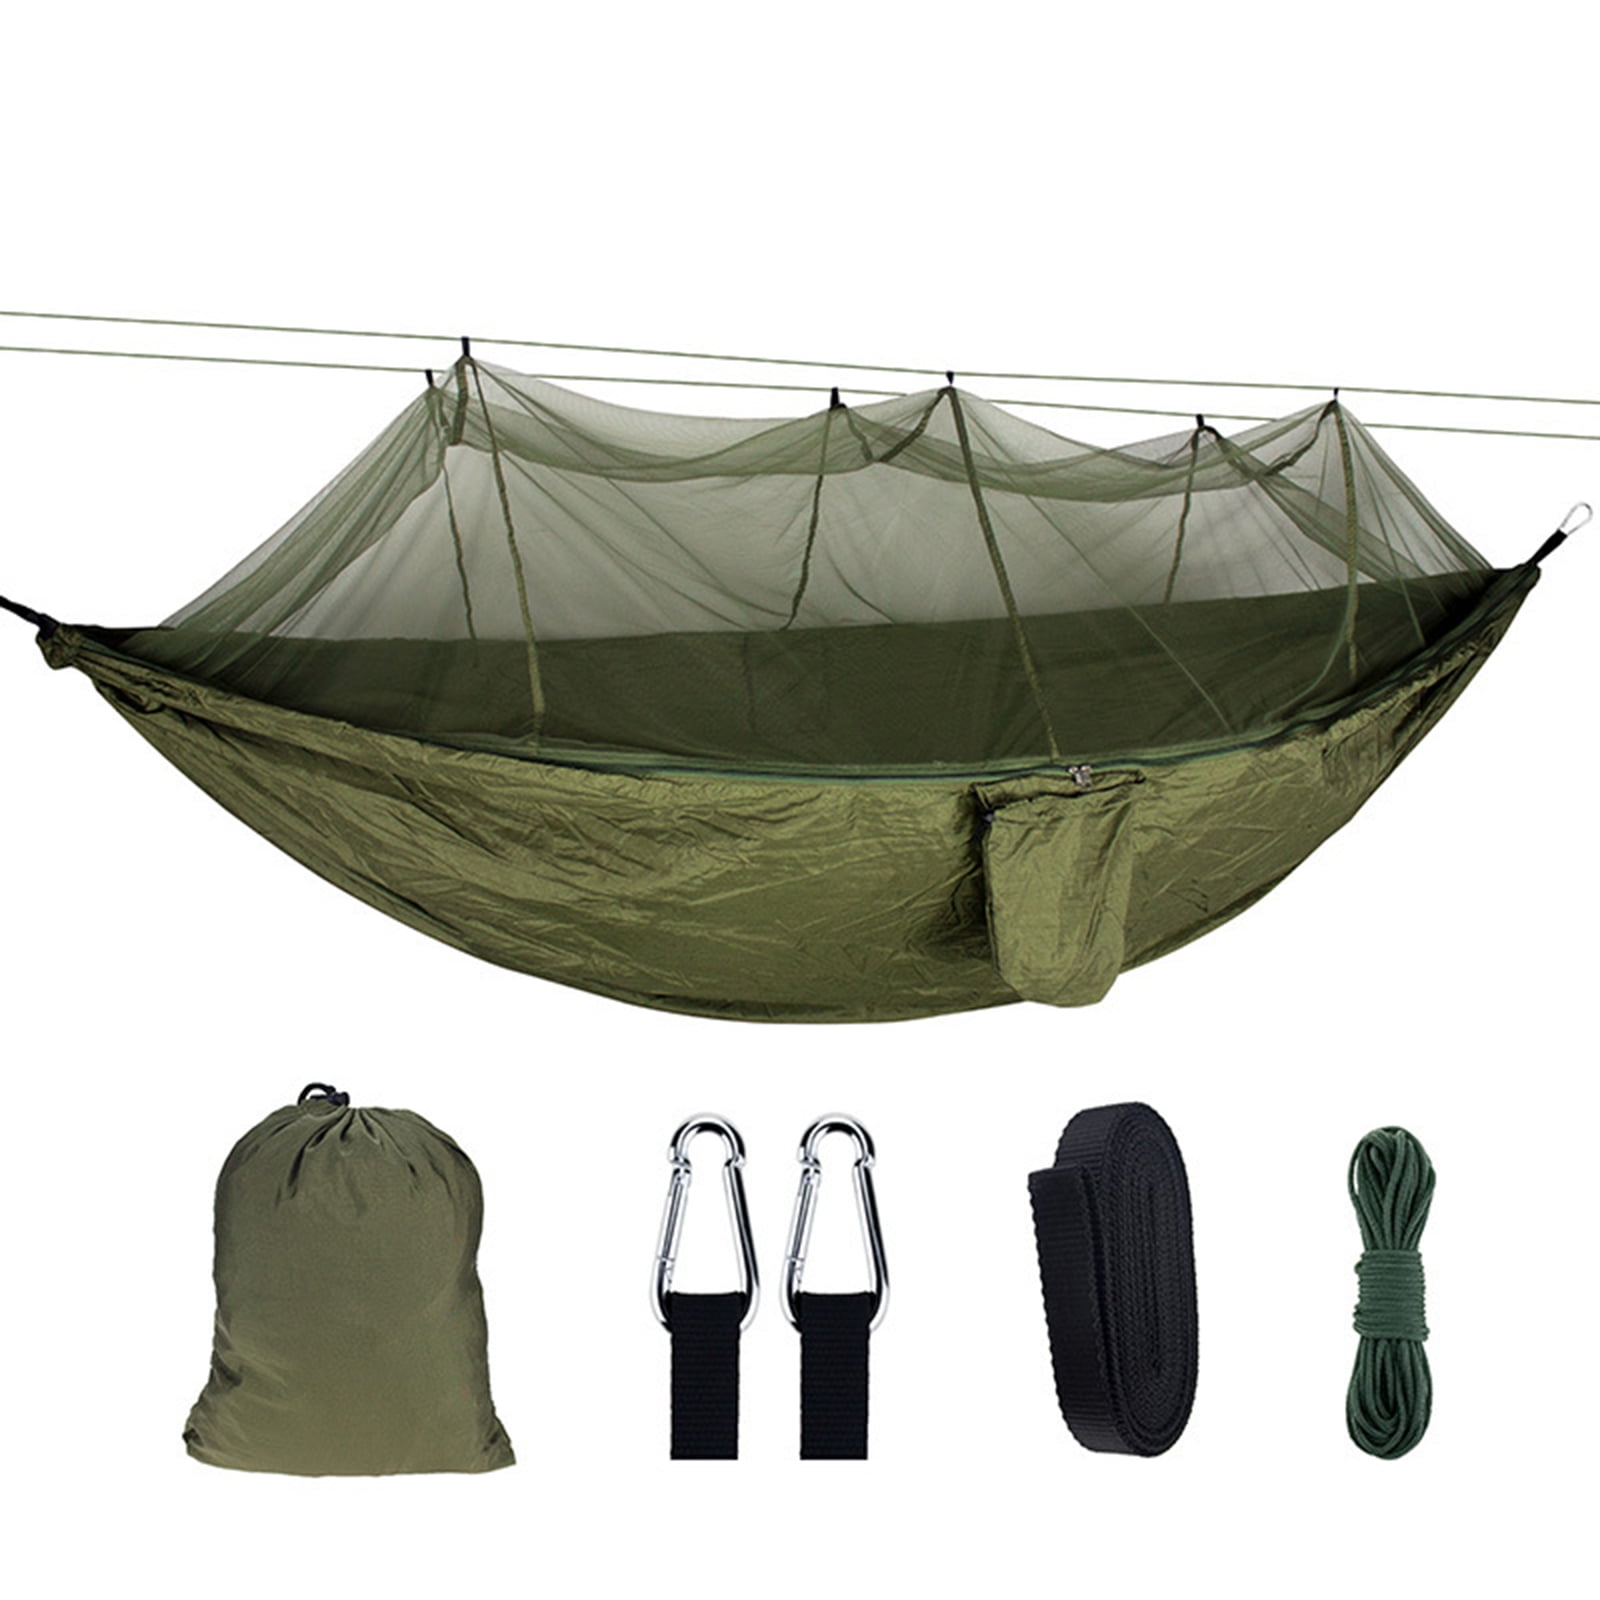 Outdoor Camping Nylon Hammock Double Parachute Hanging Bed Sleeping Swing New 